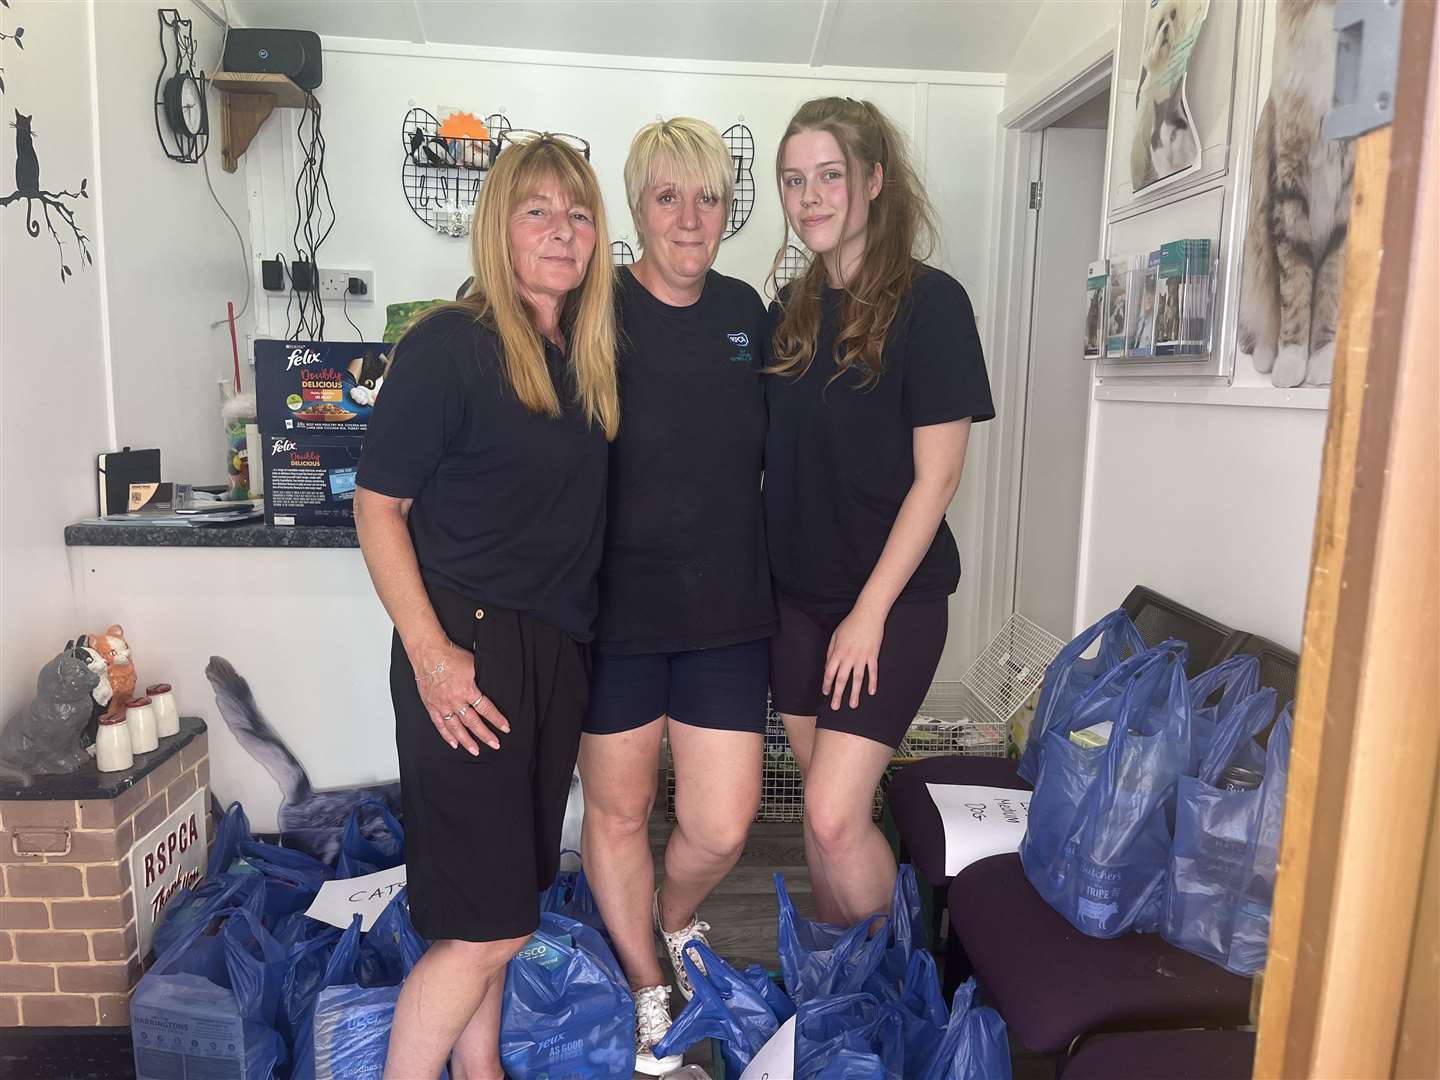 Lisa Dennis, Debbie Lepine and Rachel Sinden are happy that the pet food bank is finally open, especially during such a financially difficult time for so many people